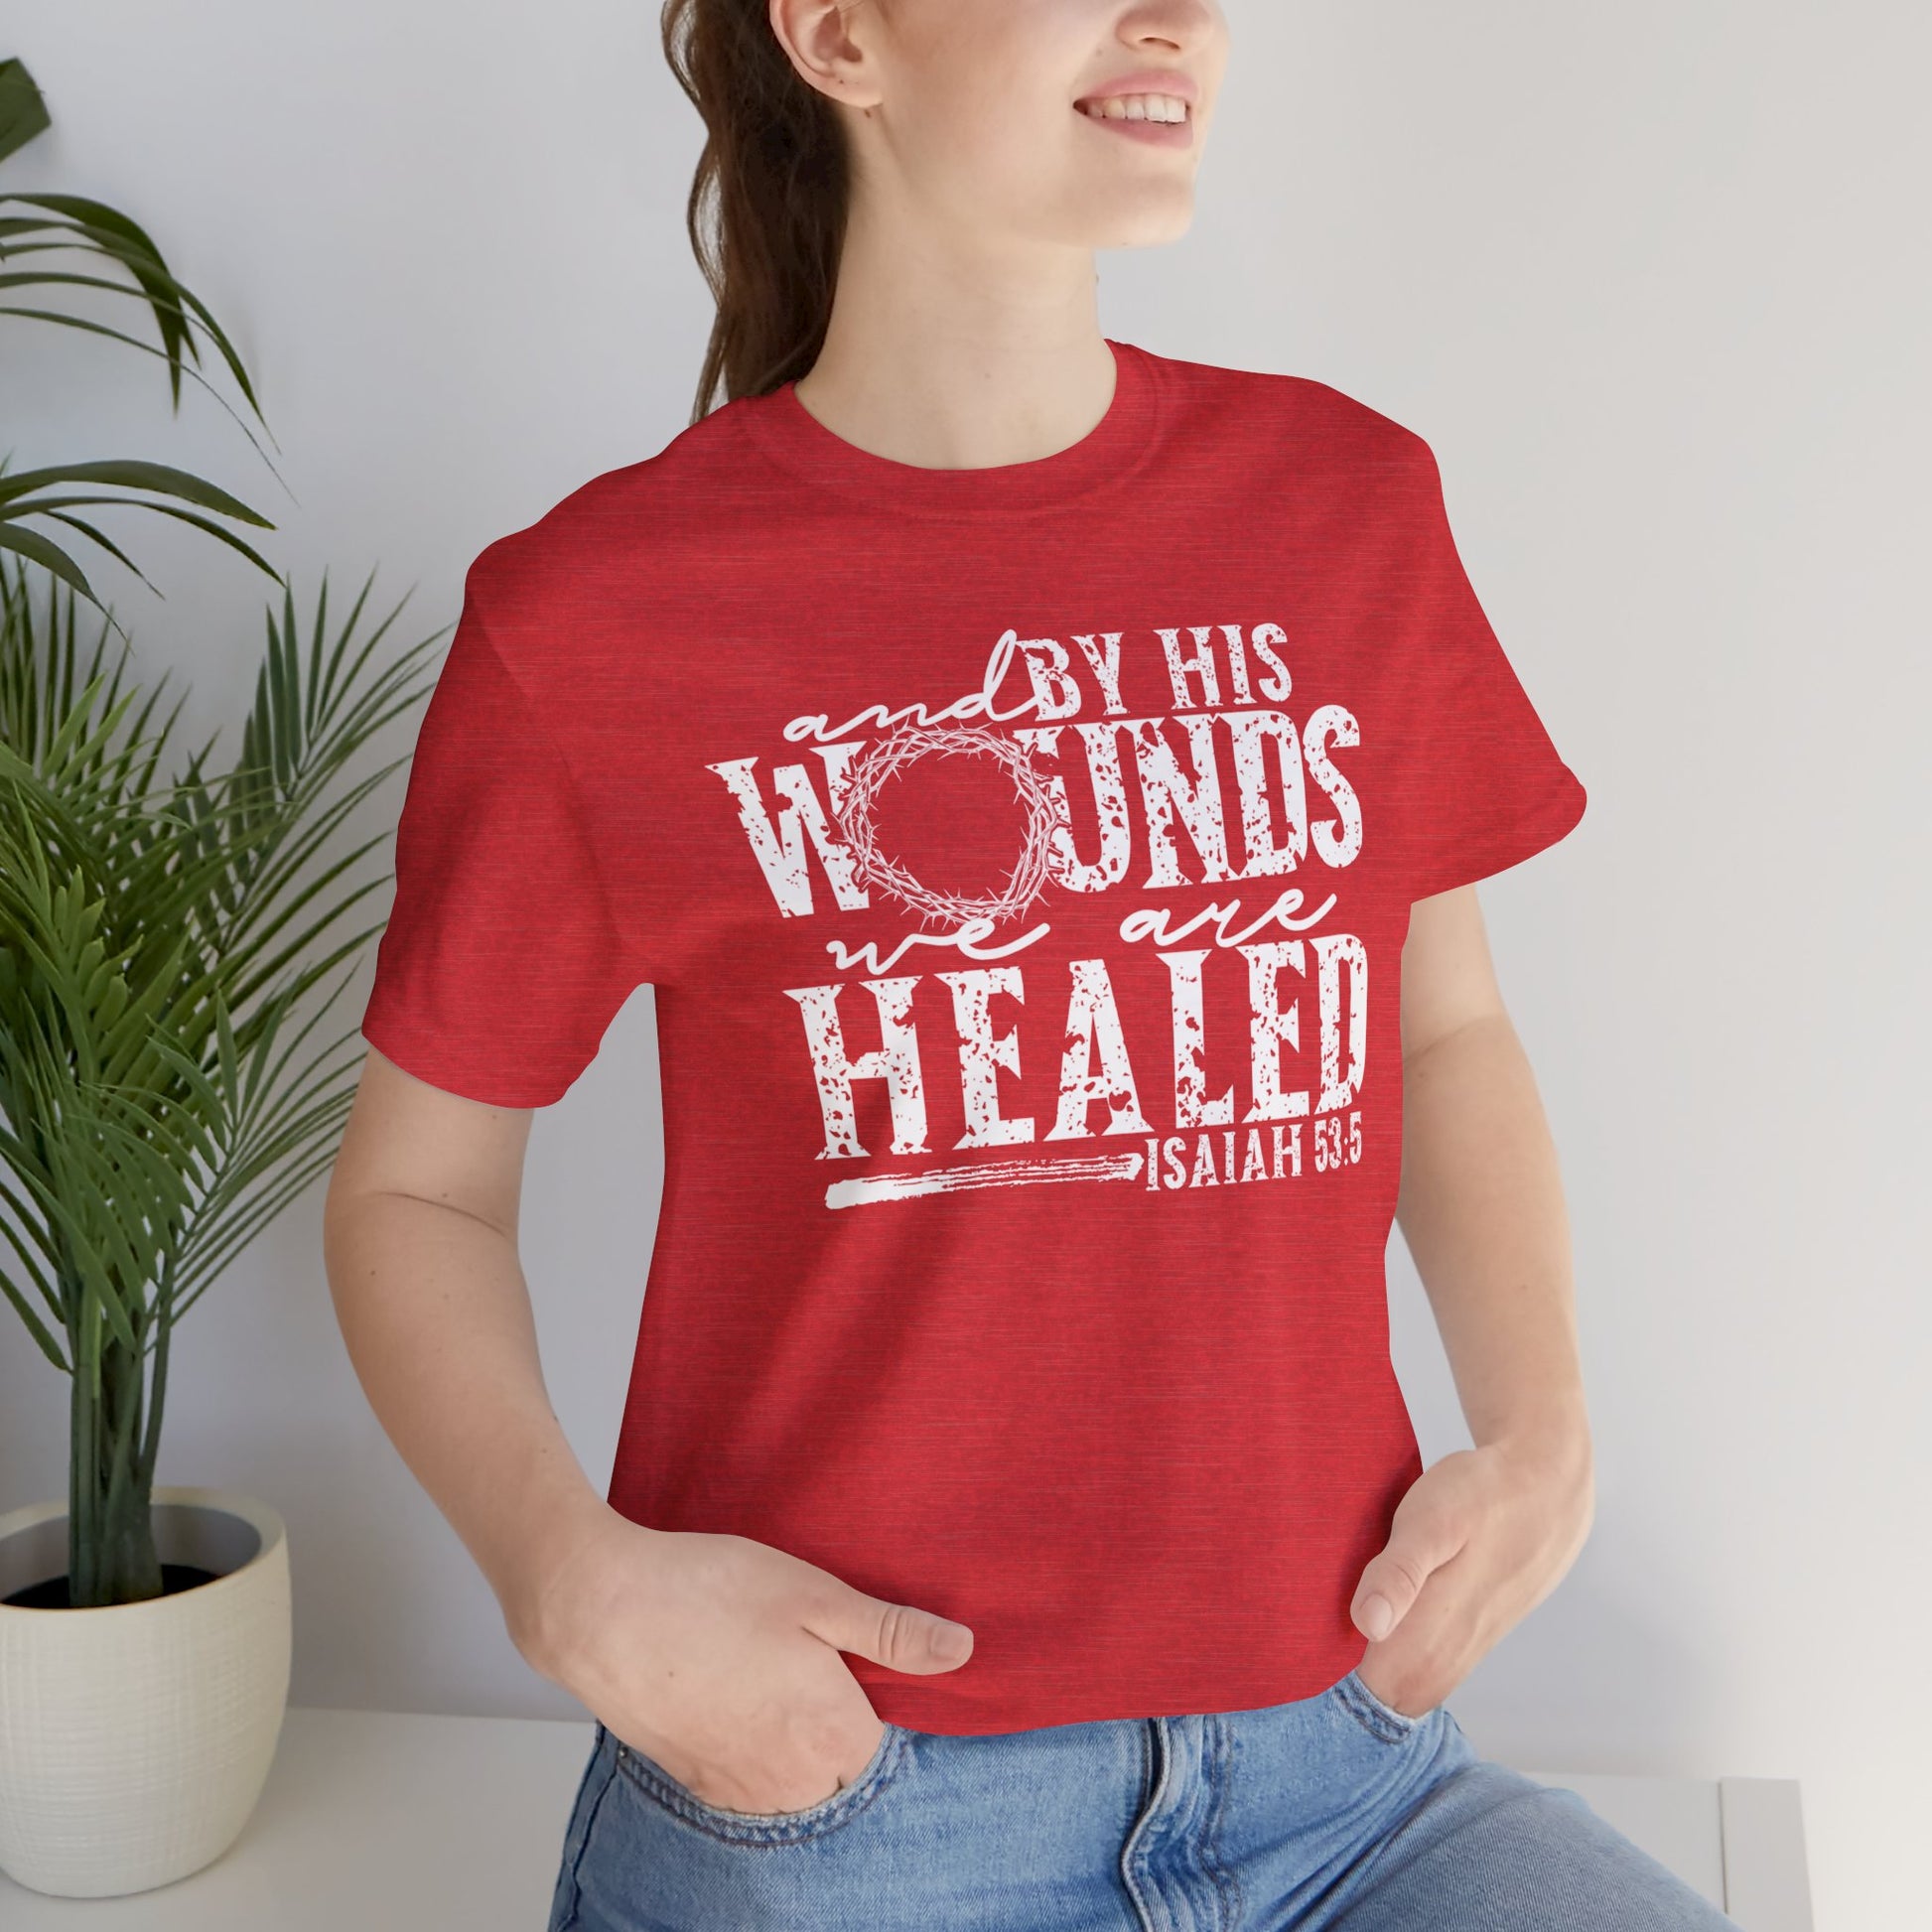 By His Wounds We Are Healed Christian Faith Shirt